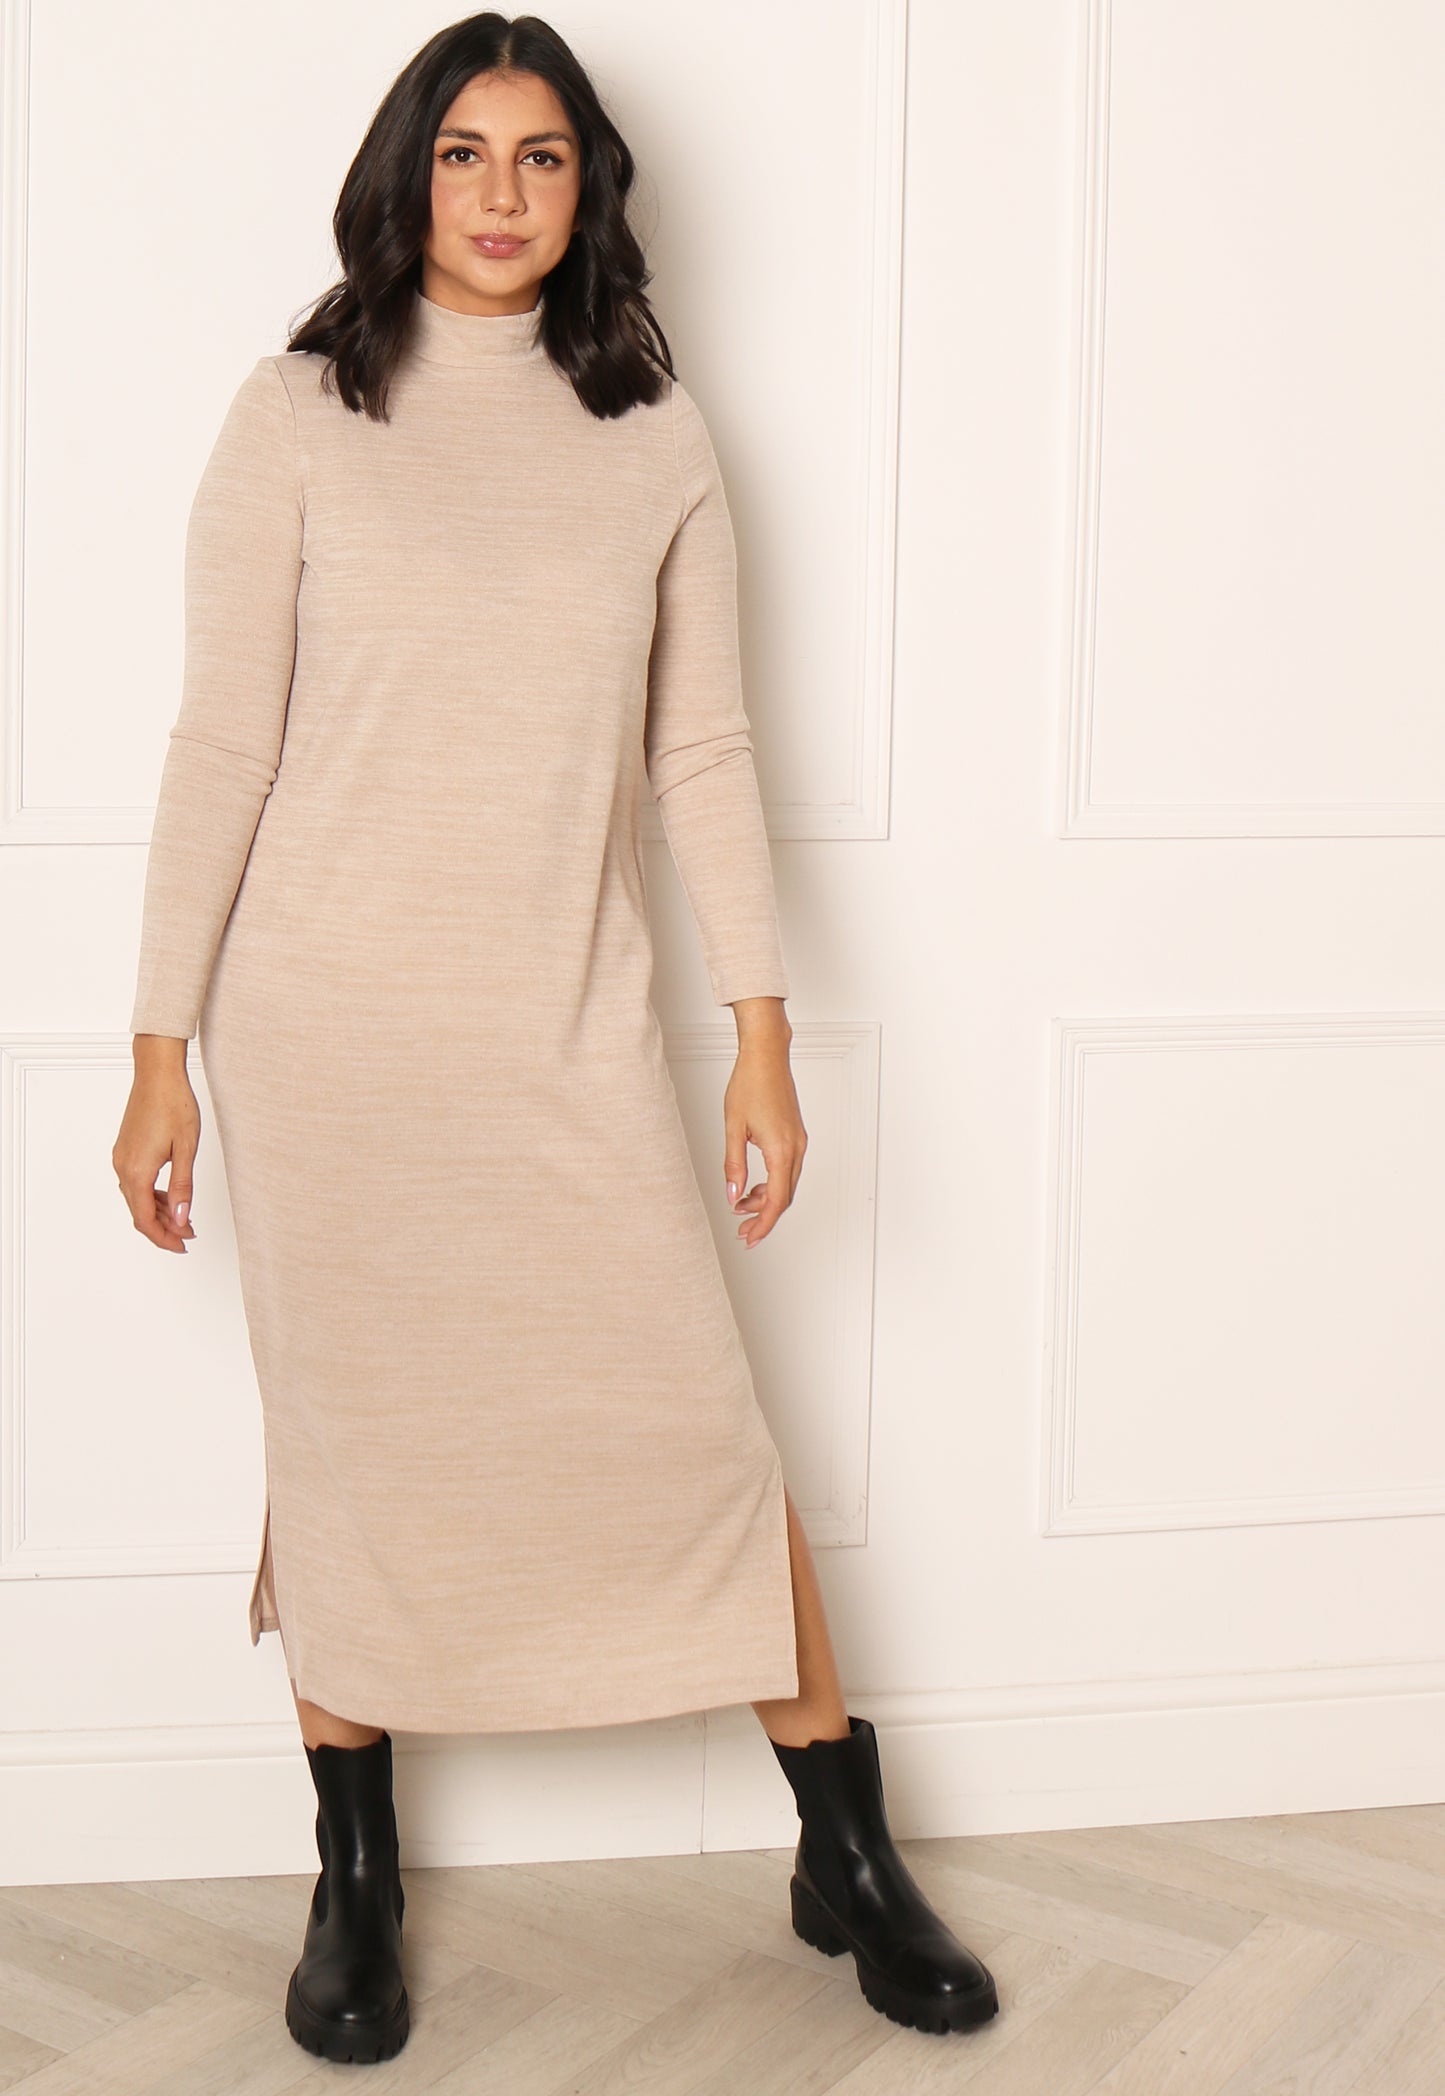 JDY Katie Jersey Knit Midaxi Dress with Turtleneck in Beige Spacedye - One Nation Clothing